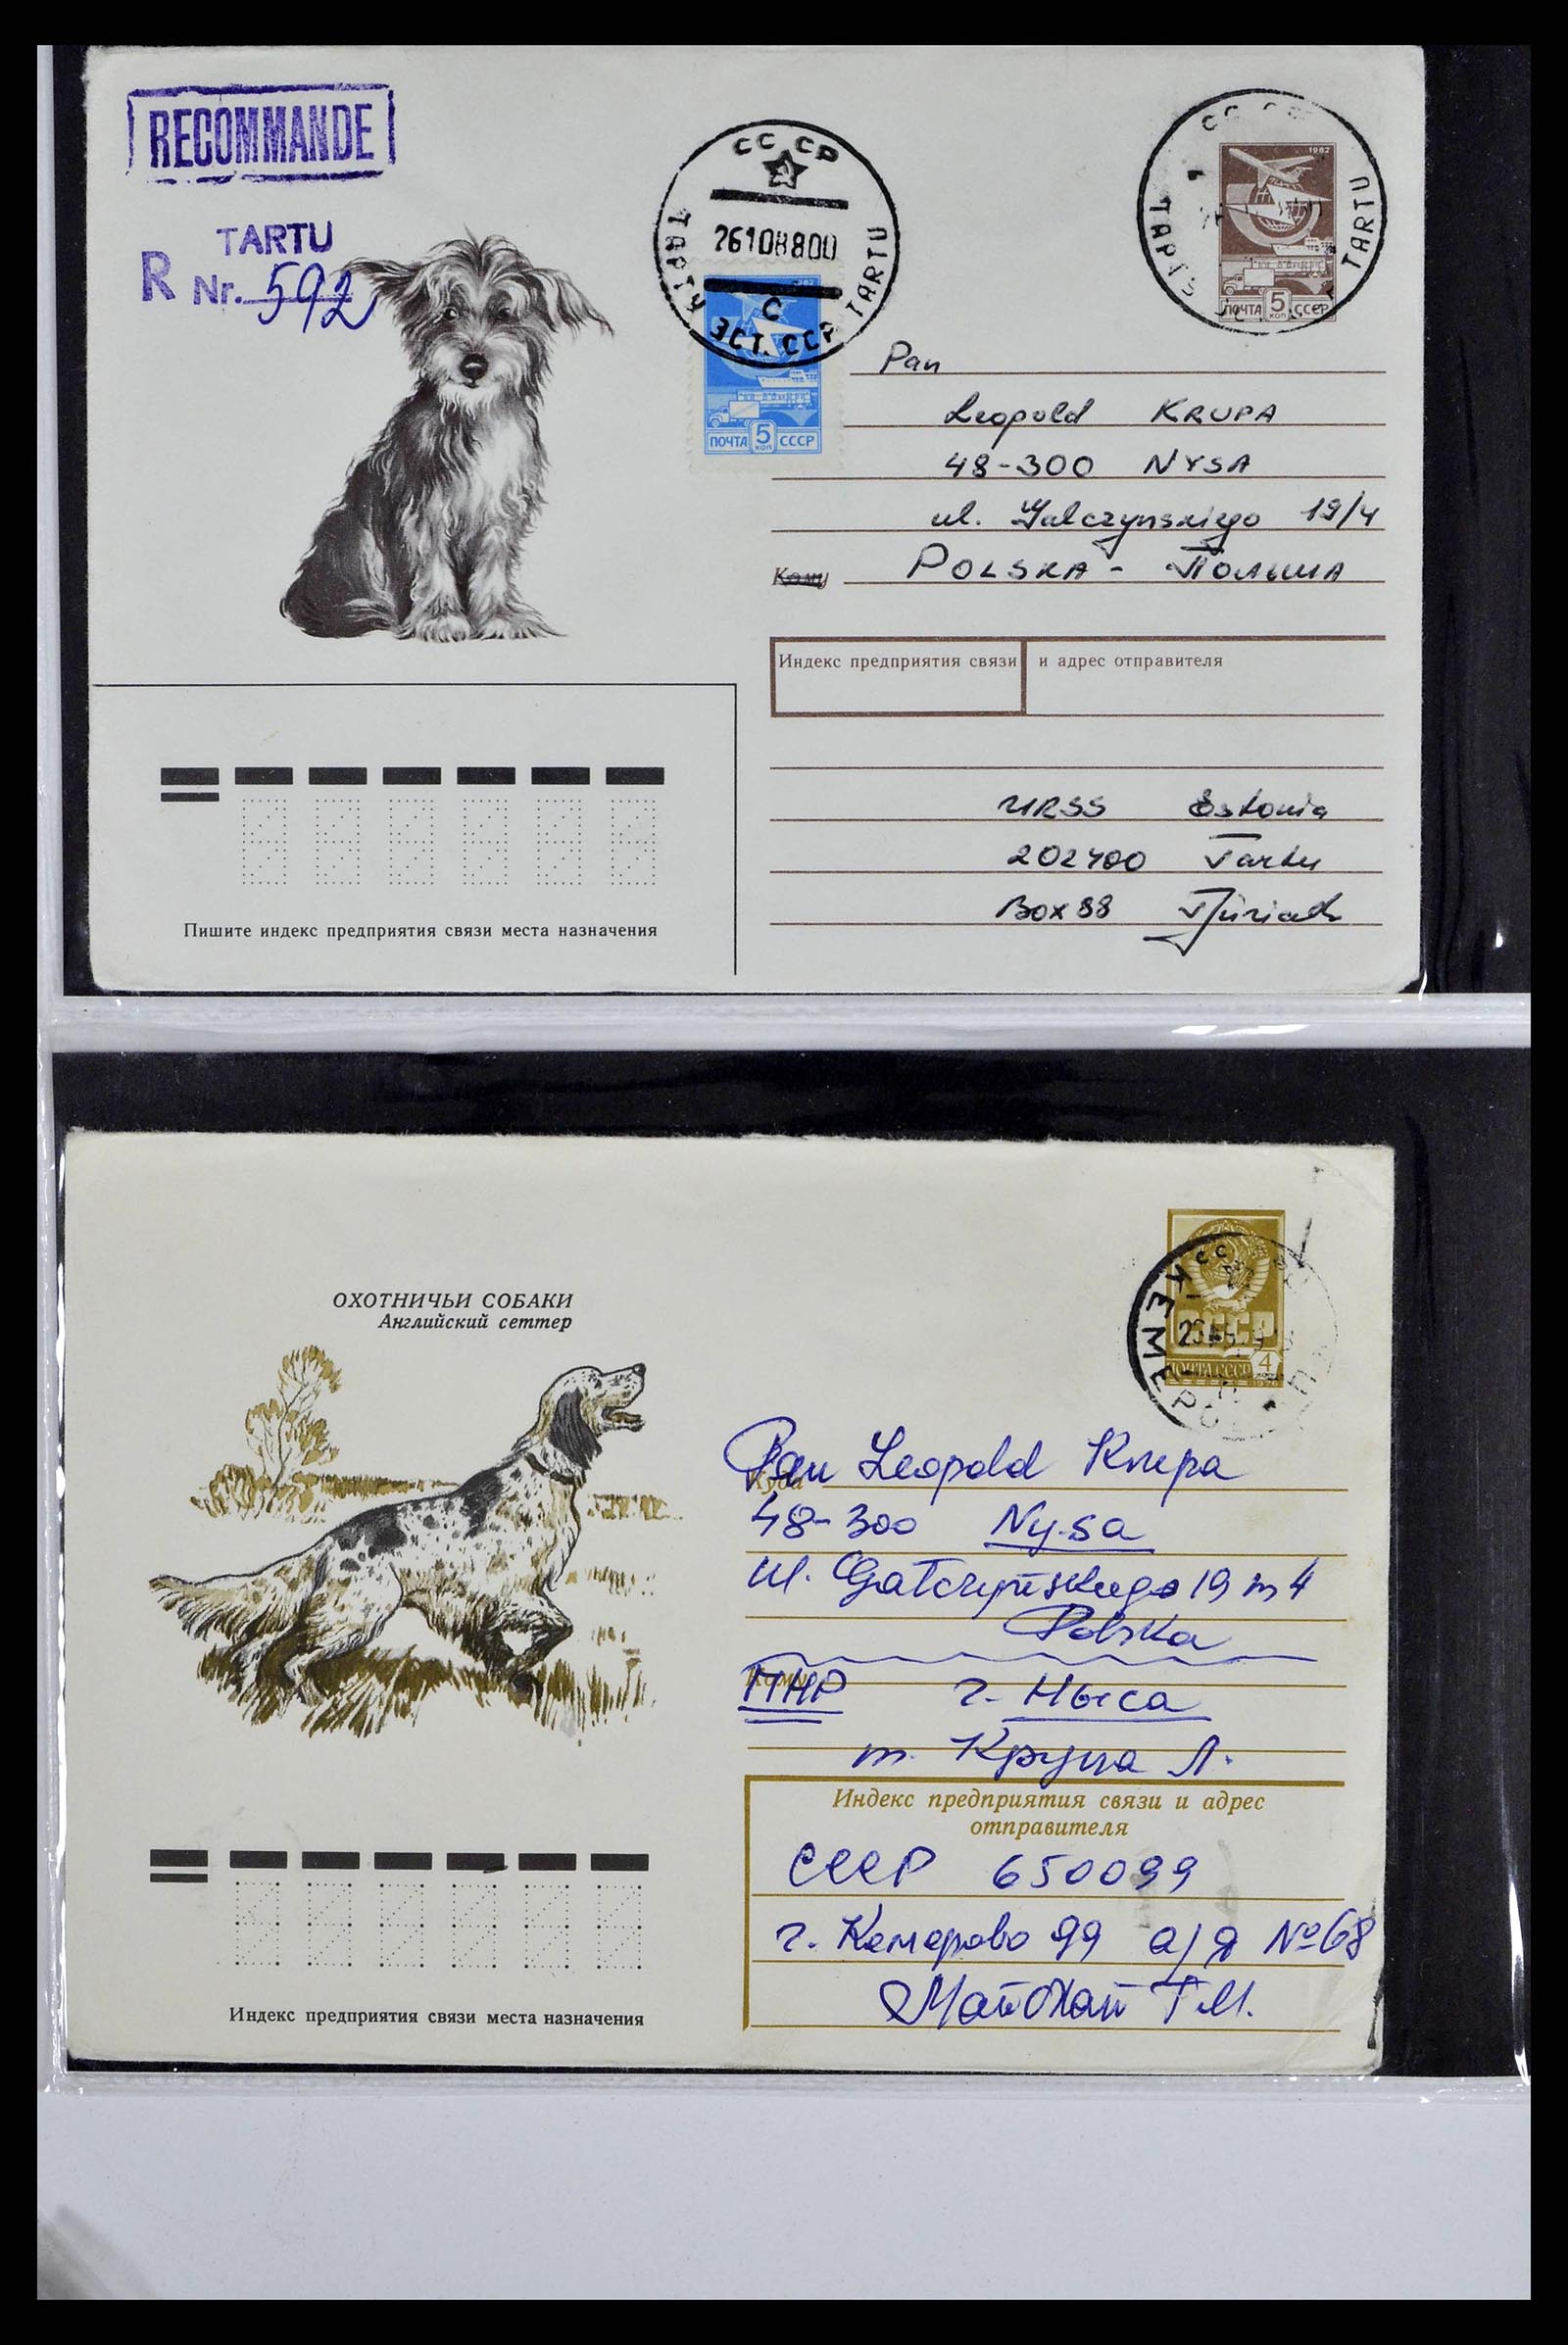 37673 0076 - Stamp collection 37673 Thematics dogs covers 1900-2000.